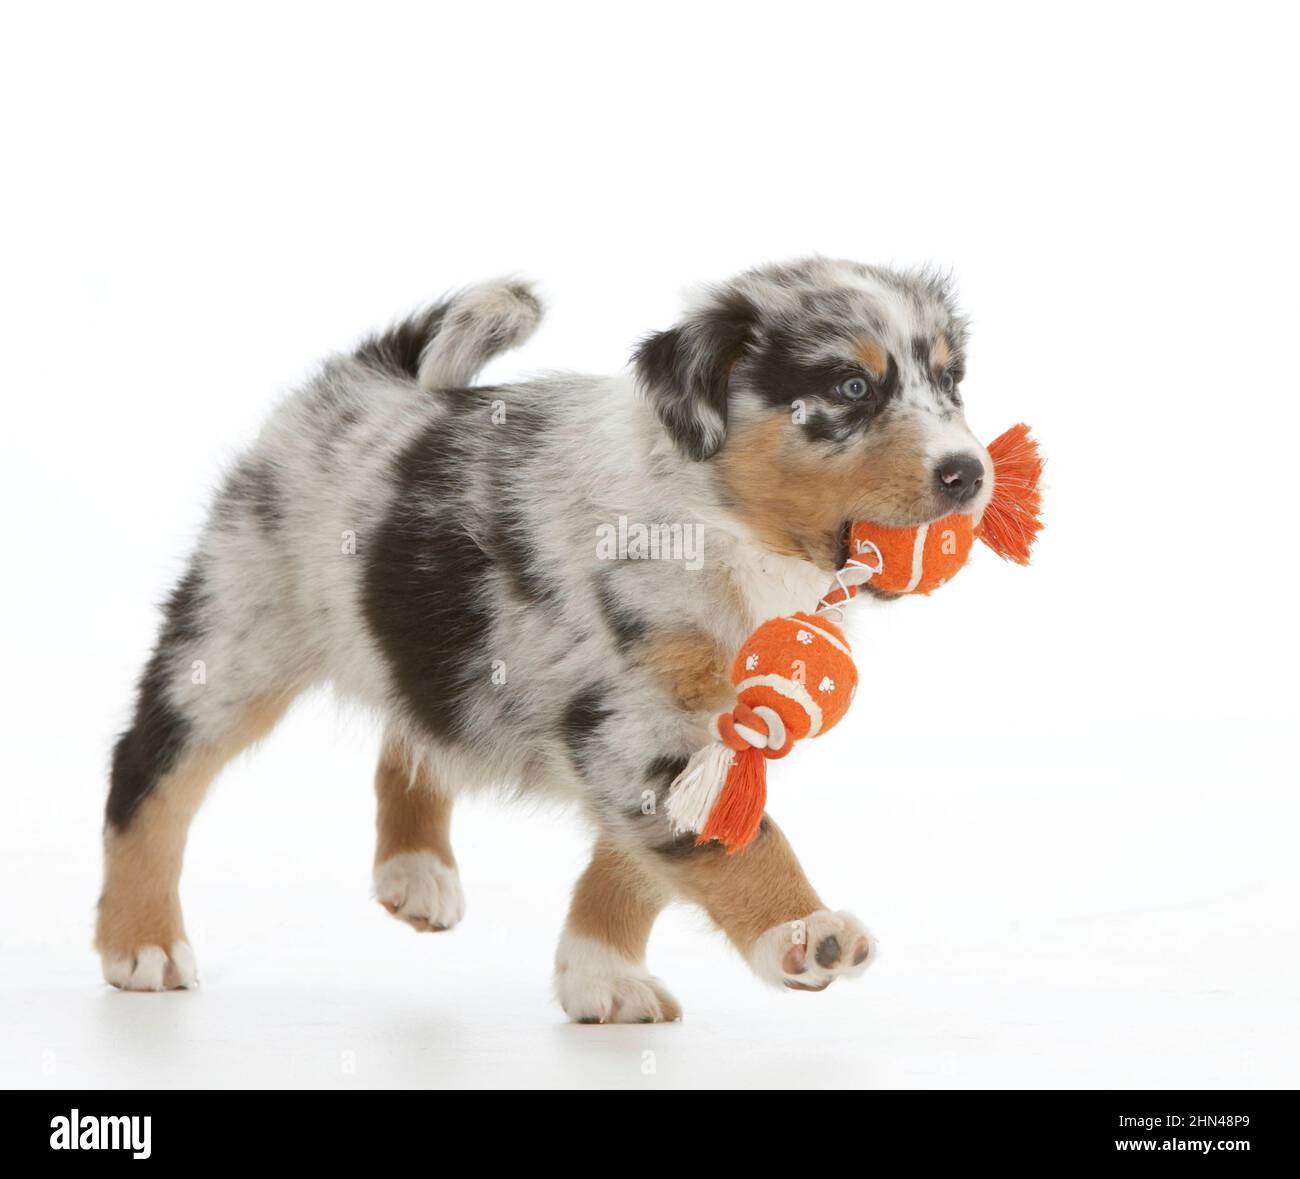 Australian Shepherd. A puppy carrying a toy. Studio picture against a white background. Germany Stock Photo